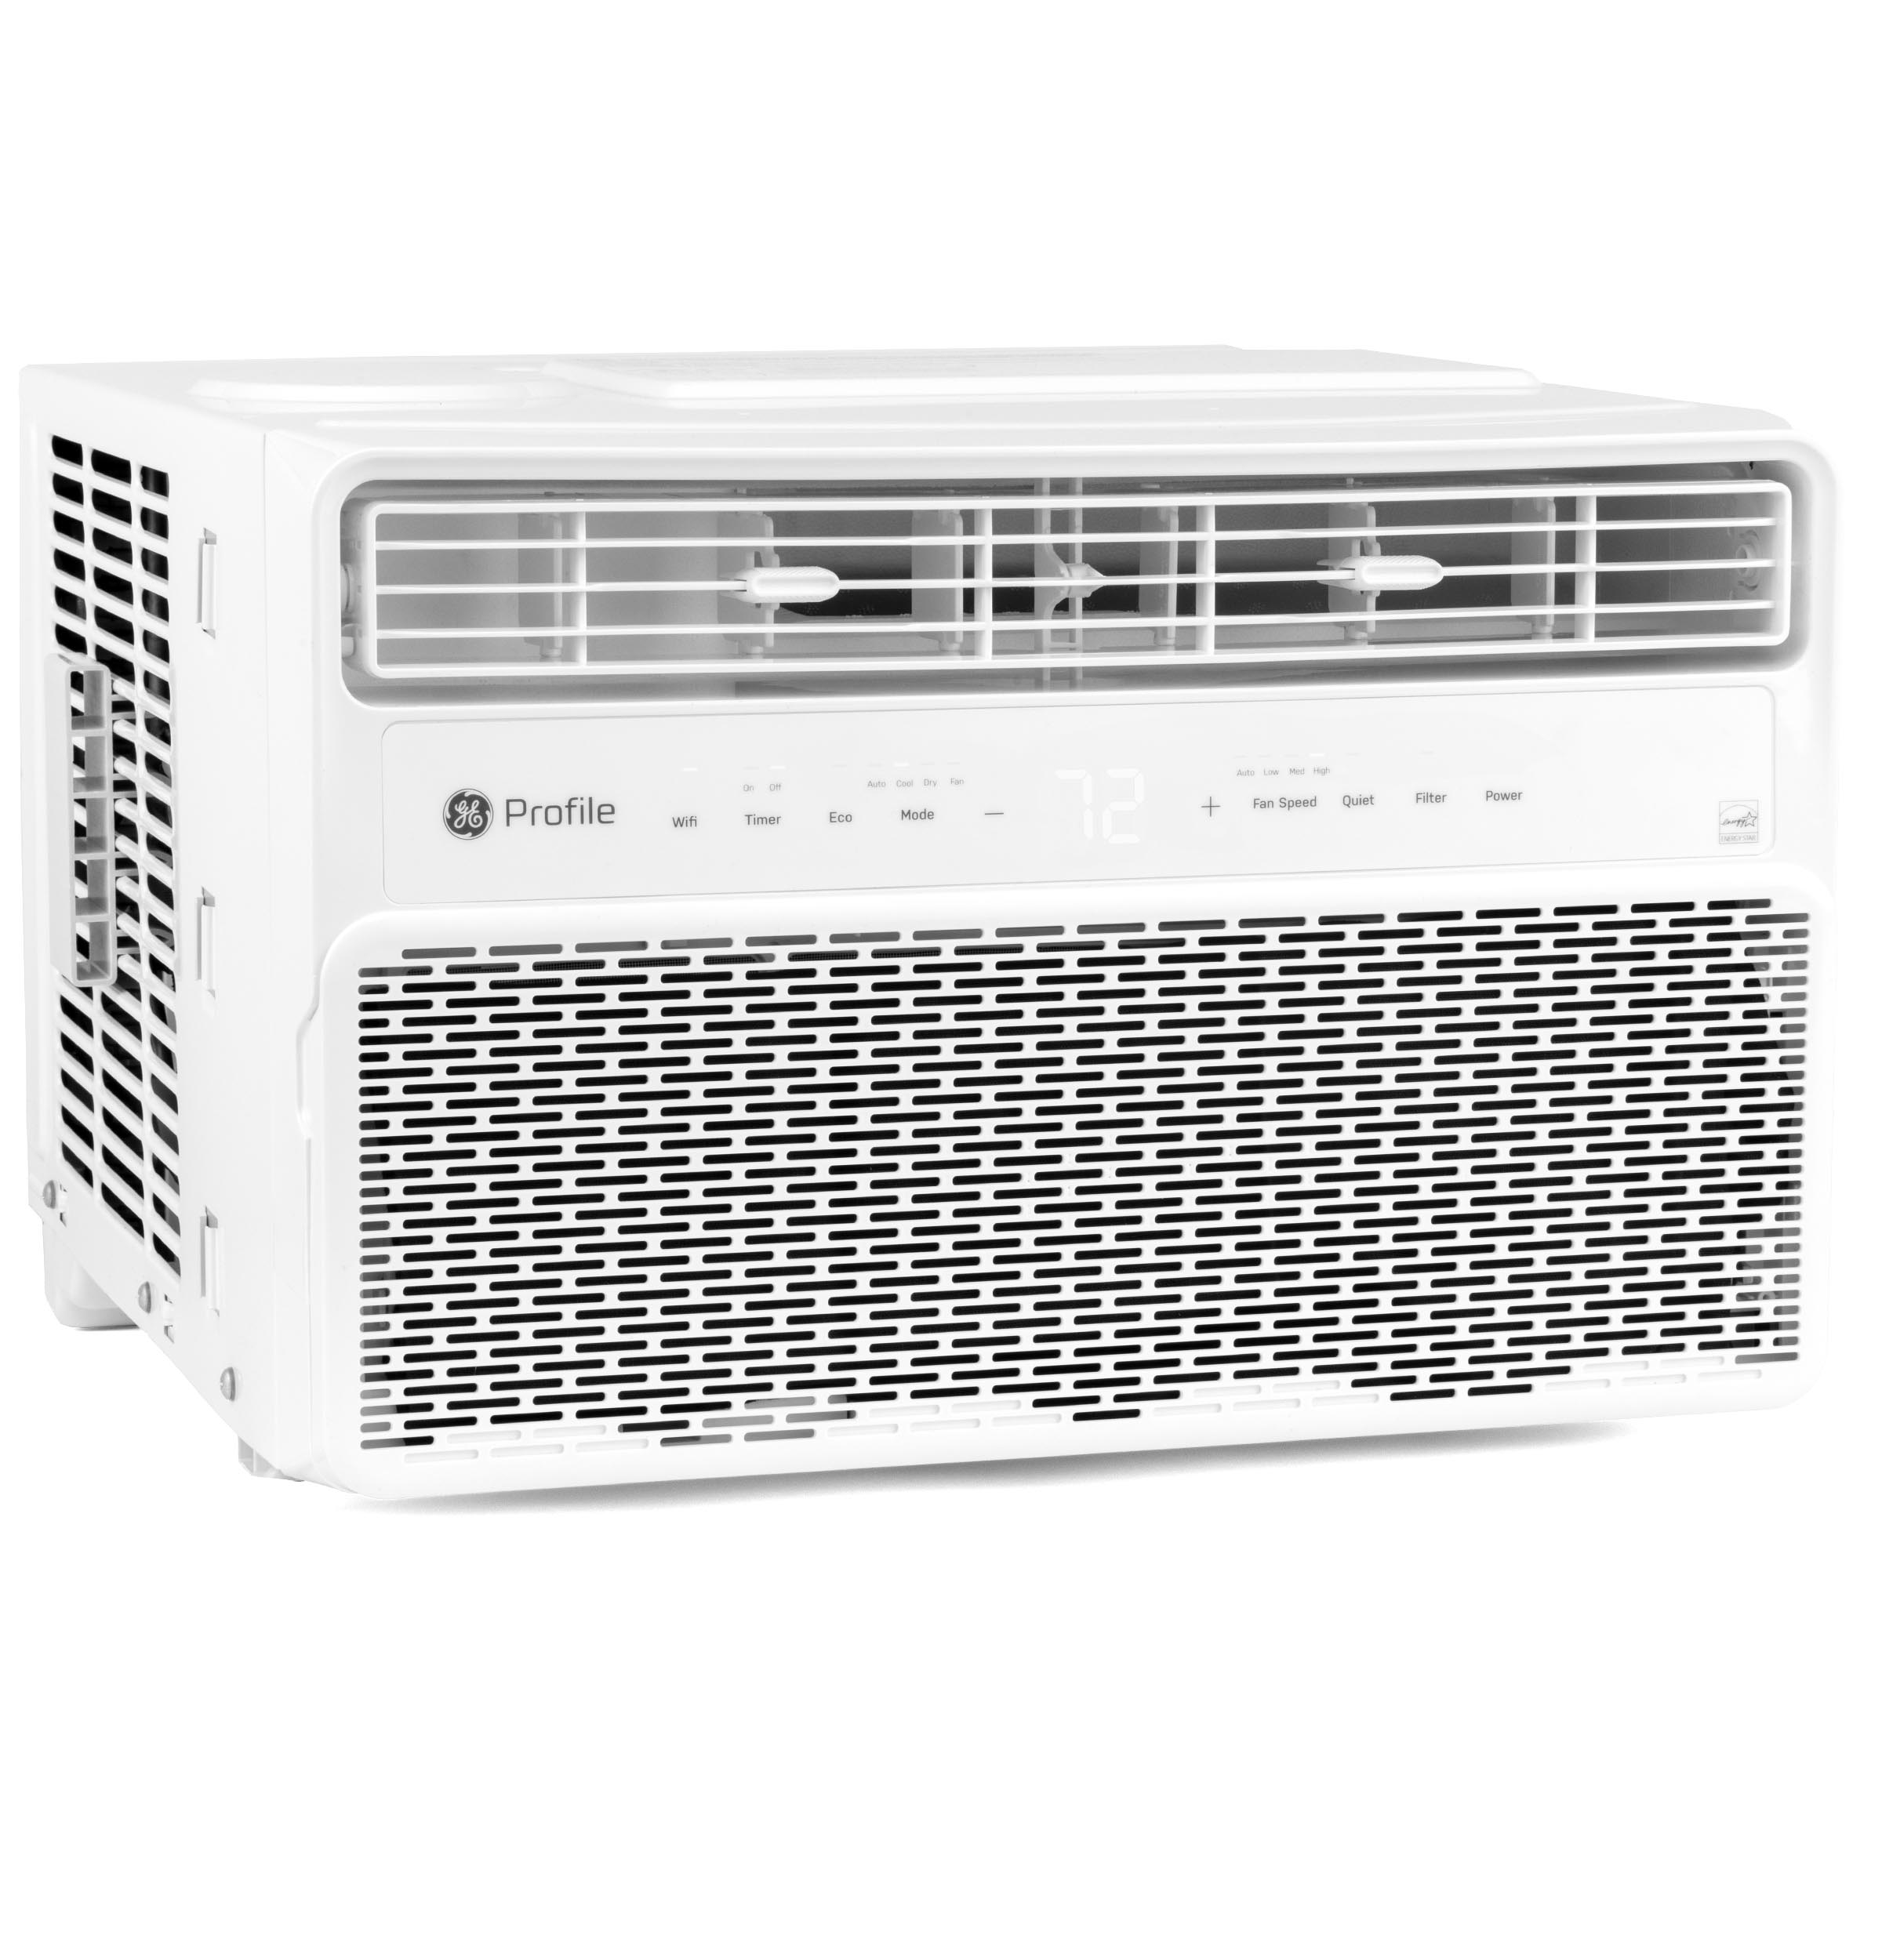 Ge Appliances PWDV10WWF Ge Profile™ Energy Star® 10,000 Btu Inverter Smart Ultra Quiet Window Air Conditioner For Medium Rooms Up To 450 Sq. Ft.